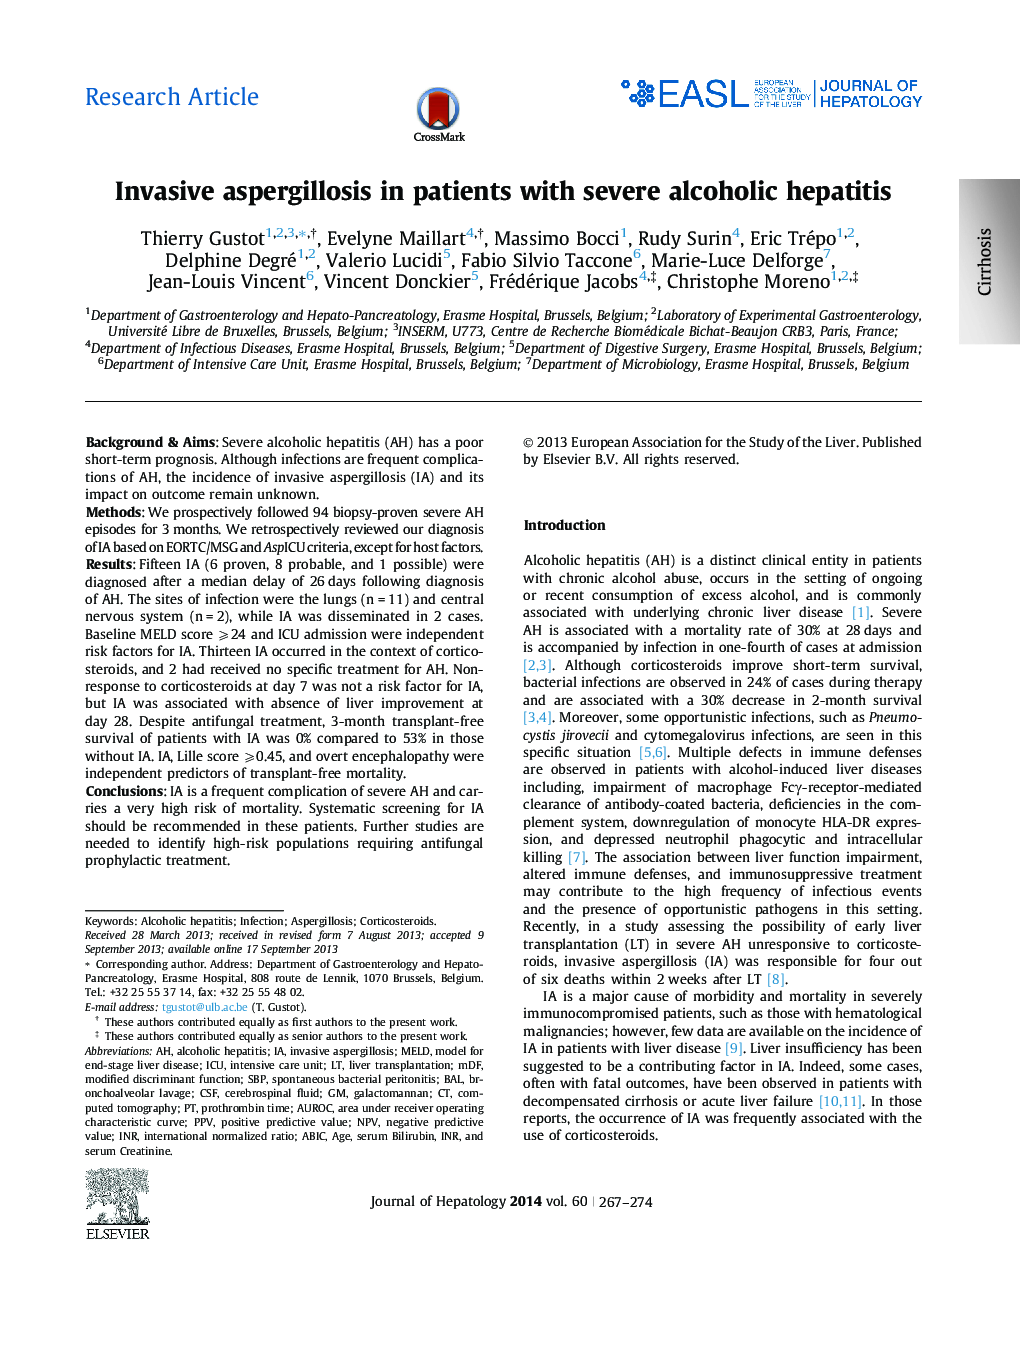 Research ArticleInvasive aspergillosis in patients with severe alcoholic hepatitis